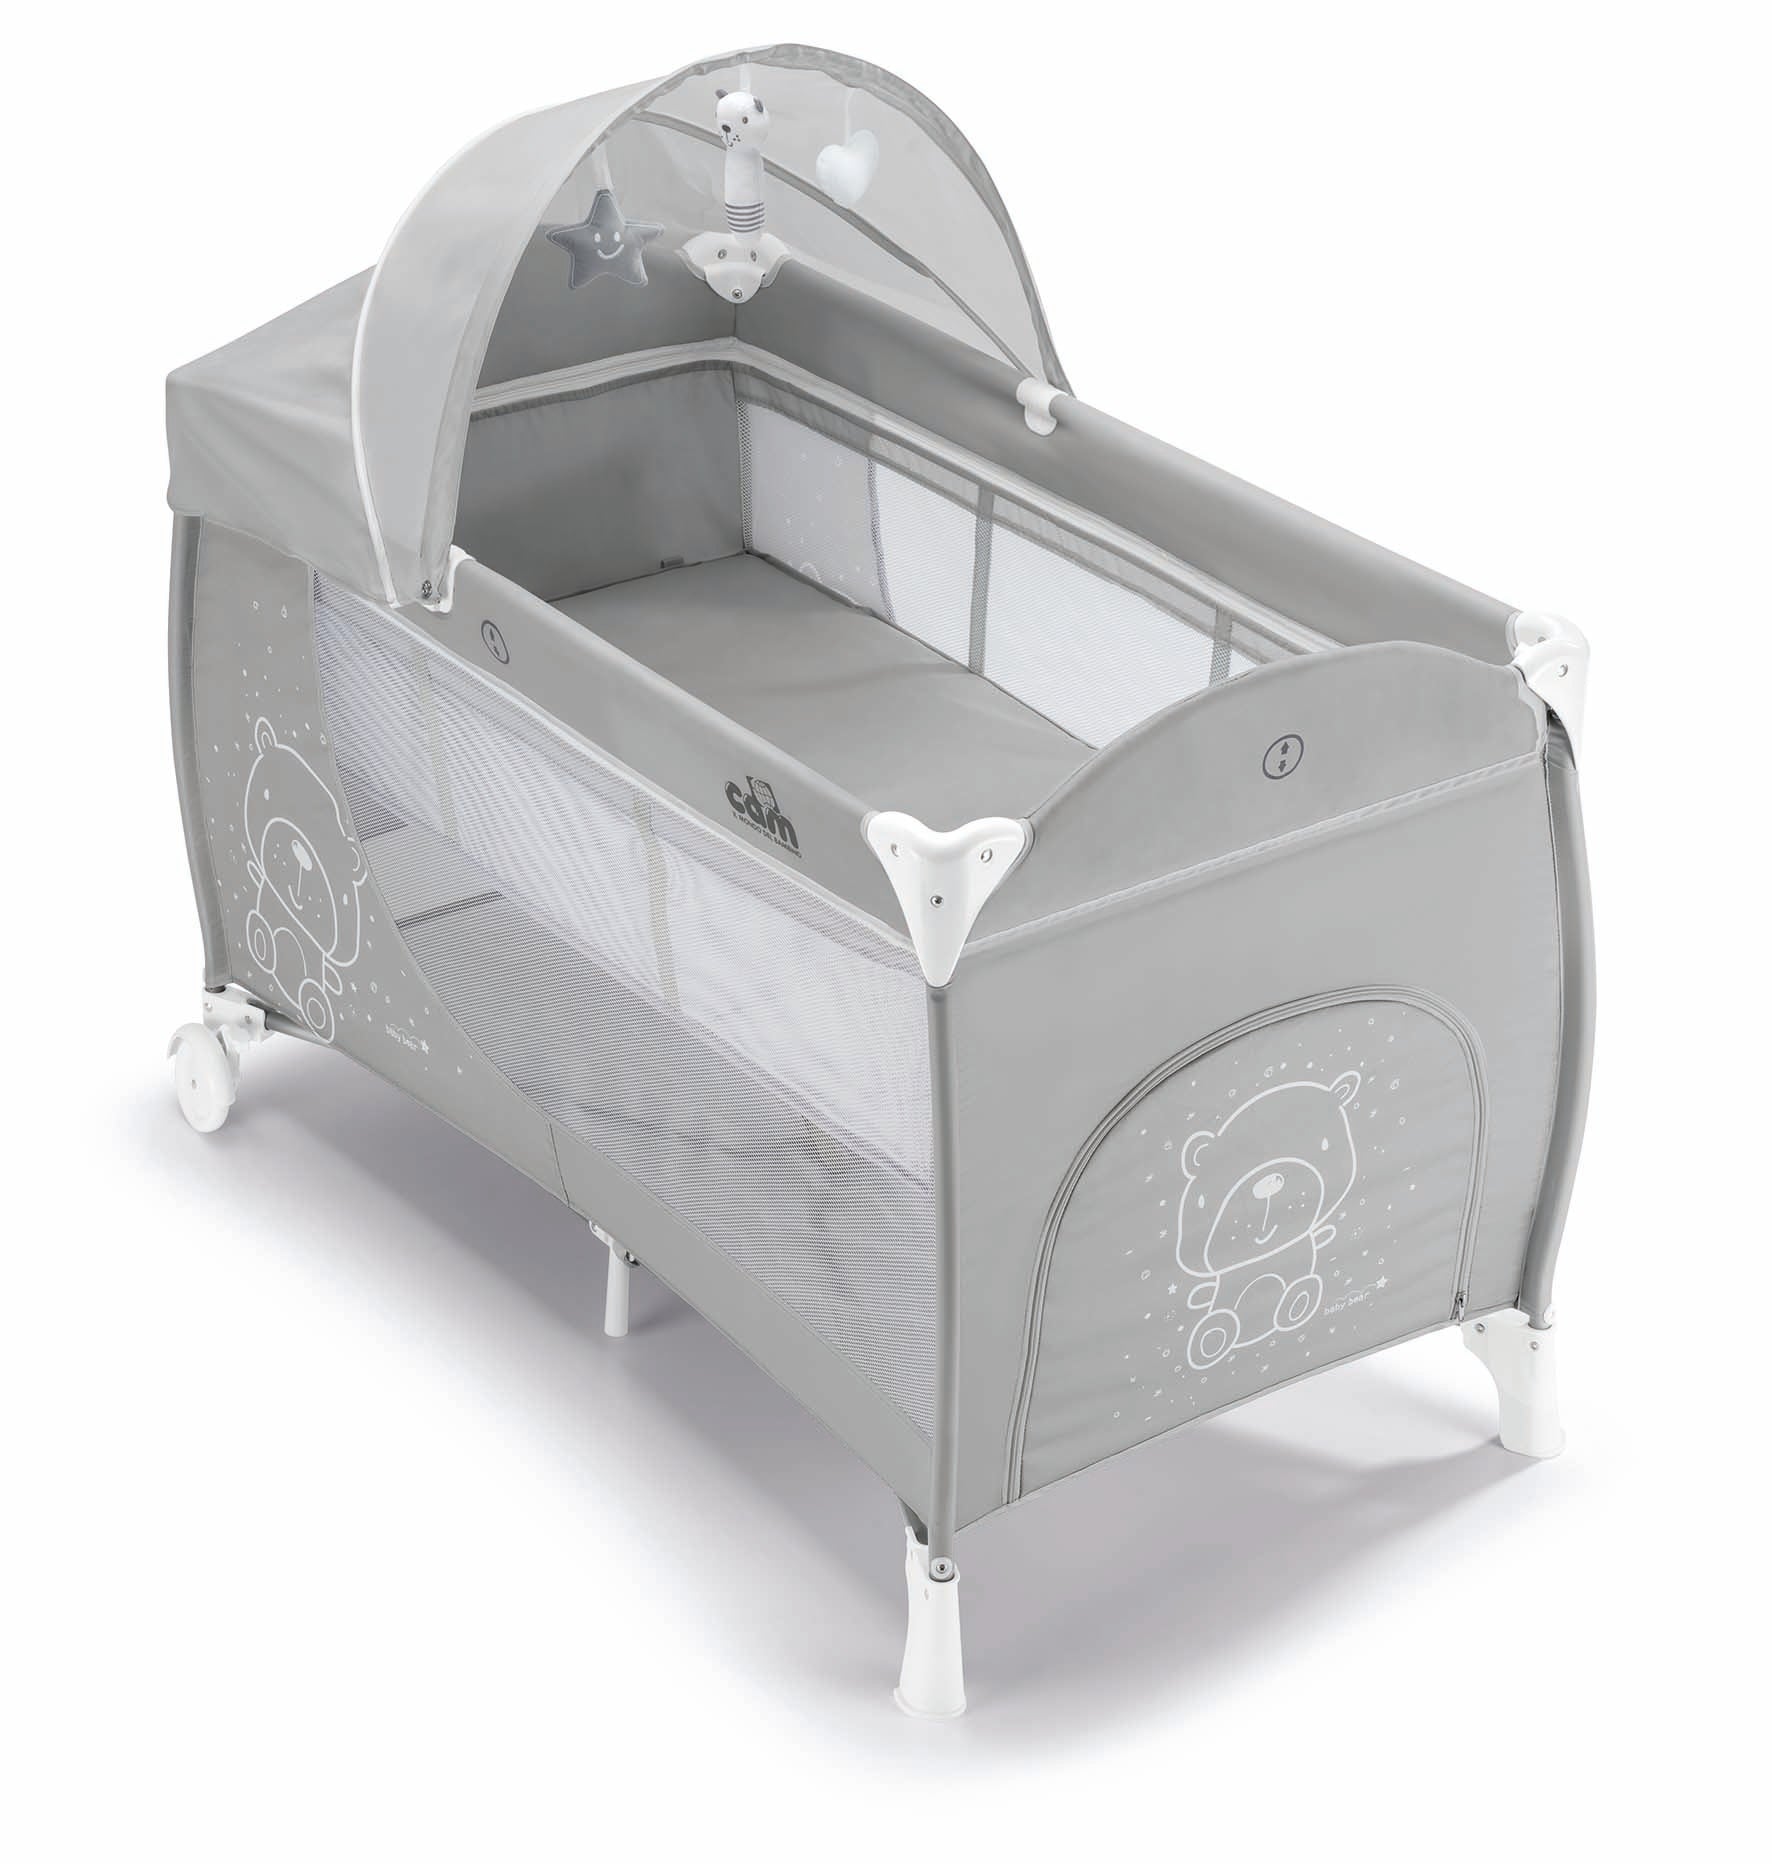 Daily Plus Compact Travel Cot - Comfortable and Convenient for Babies and Toddlers by CAM and solf in South Africa by CB Baby